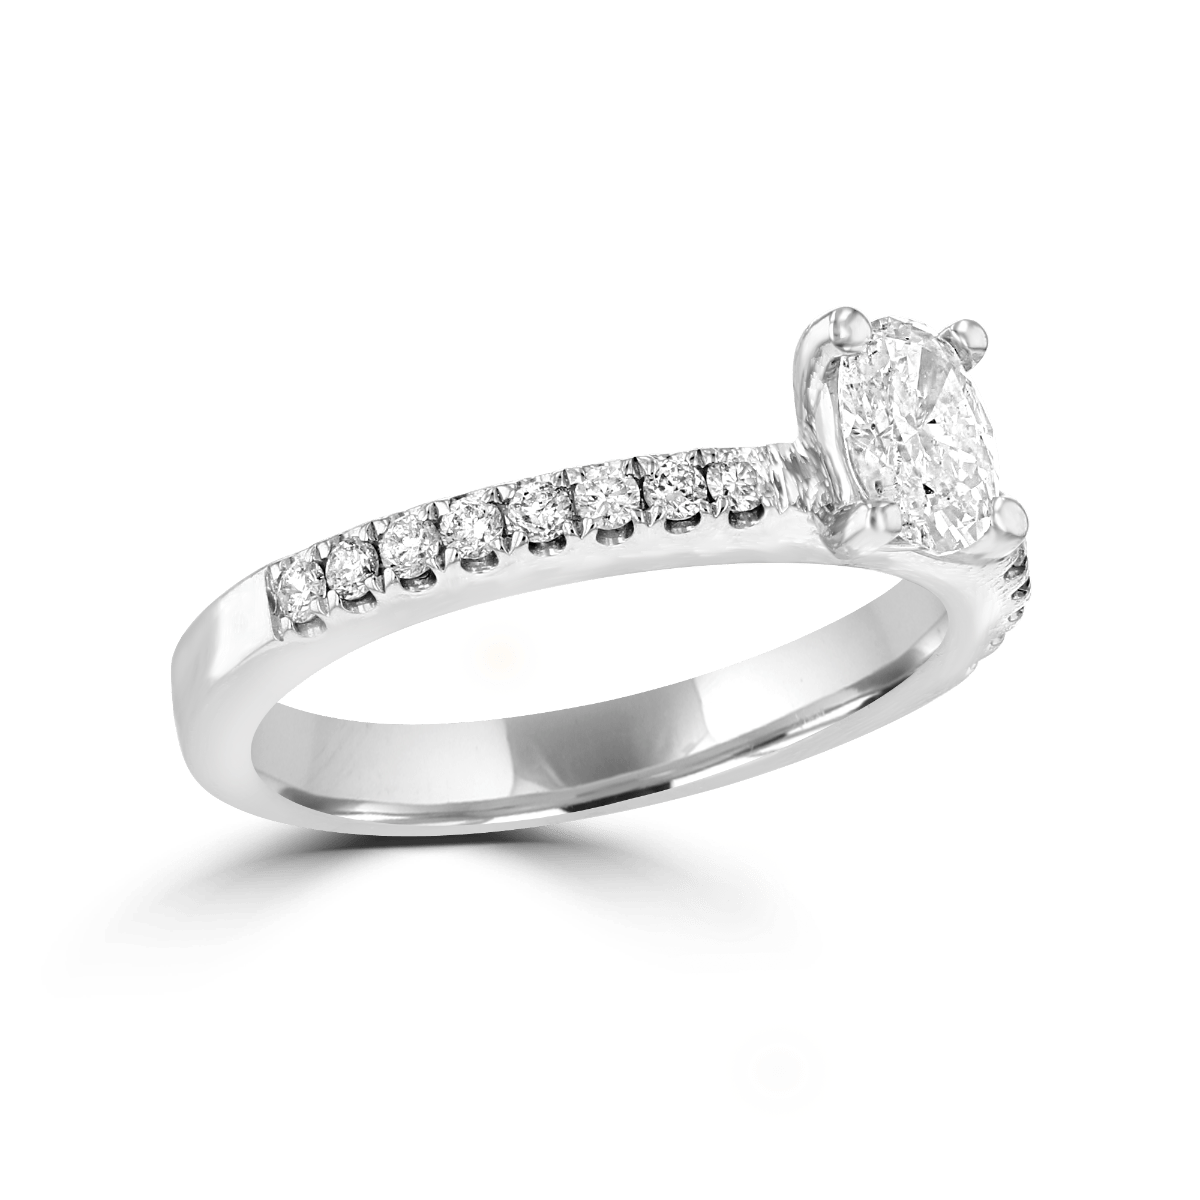 14KT White Gold 3/4 CTW Diamond Oval Solitaire Ring 4,4.5,5,5.5,6,6.5,7,7.5,8,8.5,9